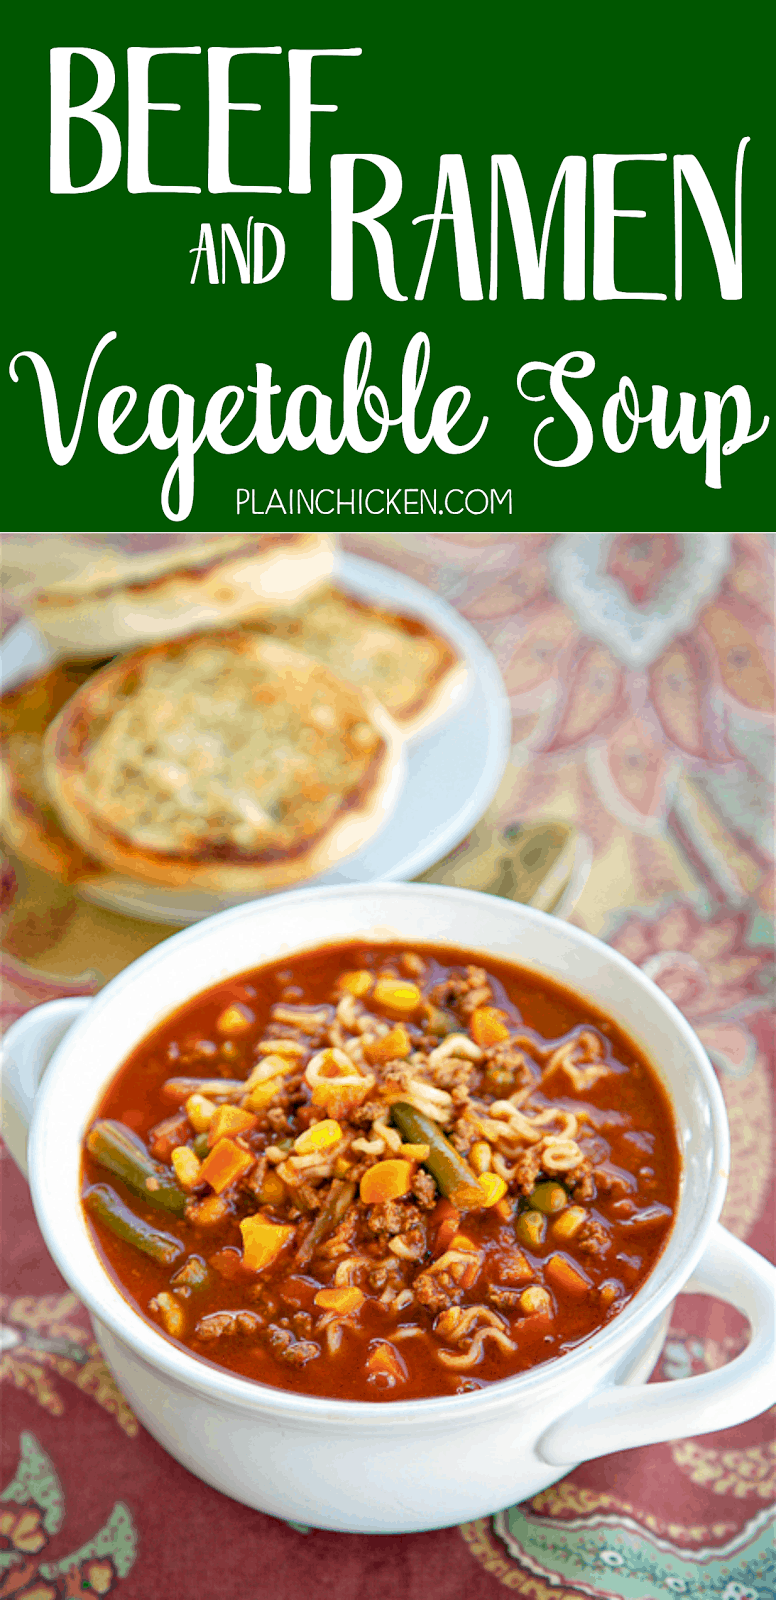 Beef and Ramen Vegetable Soup - only 5 ingredients and ready in under 20 minutes! Ground beef, V-8 Vegetable Juice, Onion Soup Mix, Beef Ramen Noodles and Mixed Vegetables. SOOO good! Everyone loved this soup and went back for seconds. Great for a crowd!